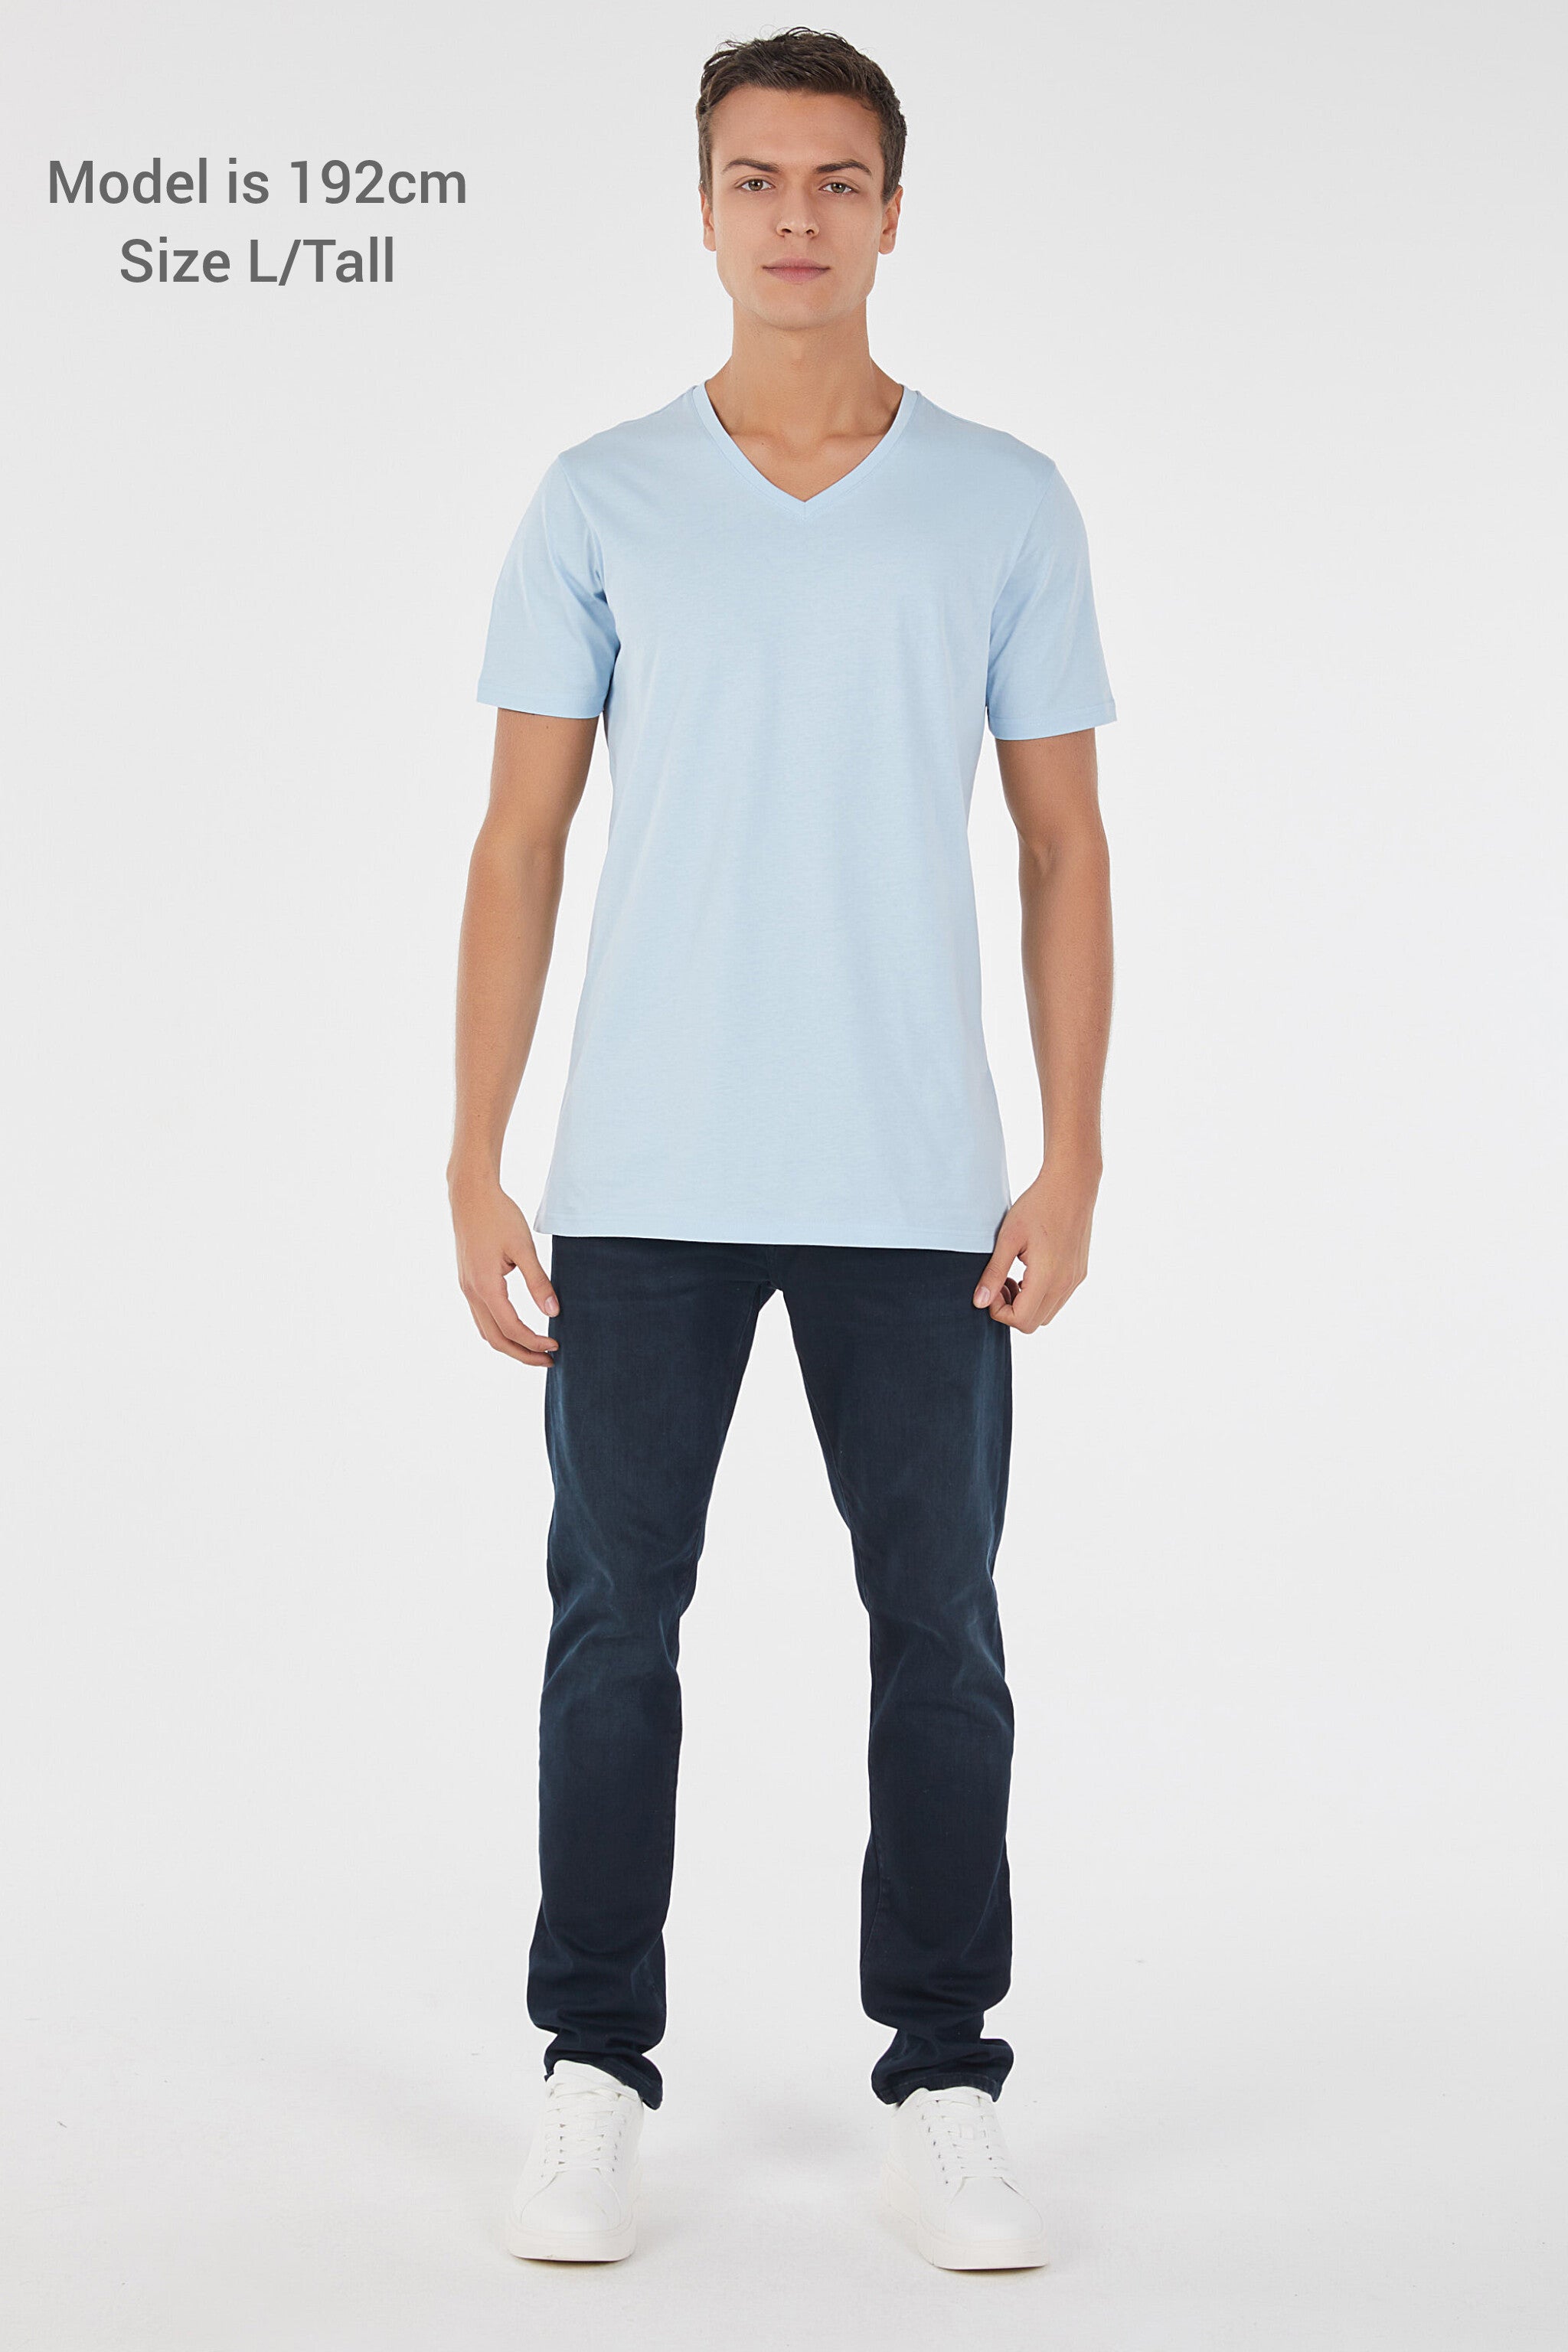 Ajax Ice Blue T-Shirt For Man | Vary Fits